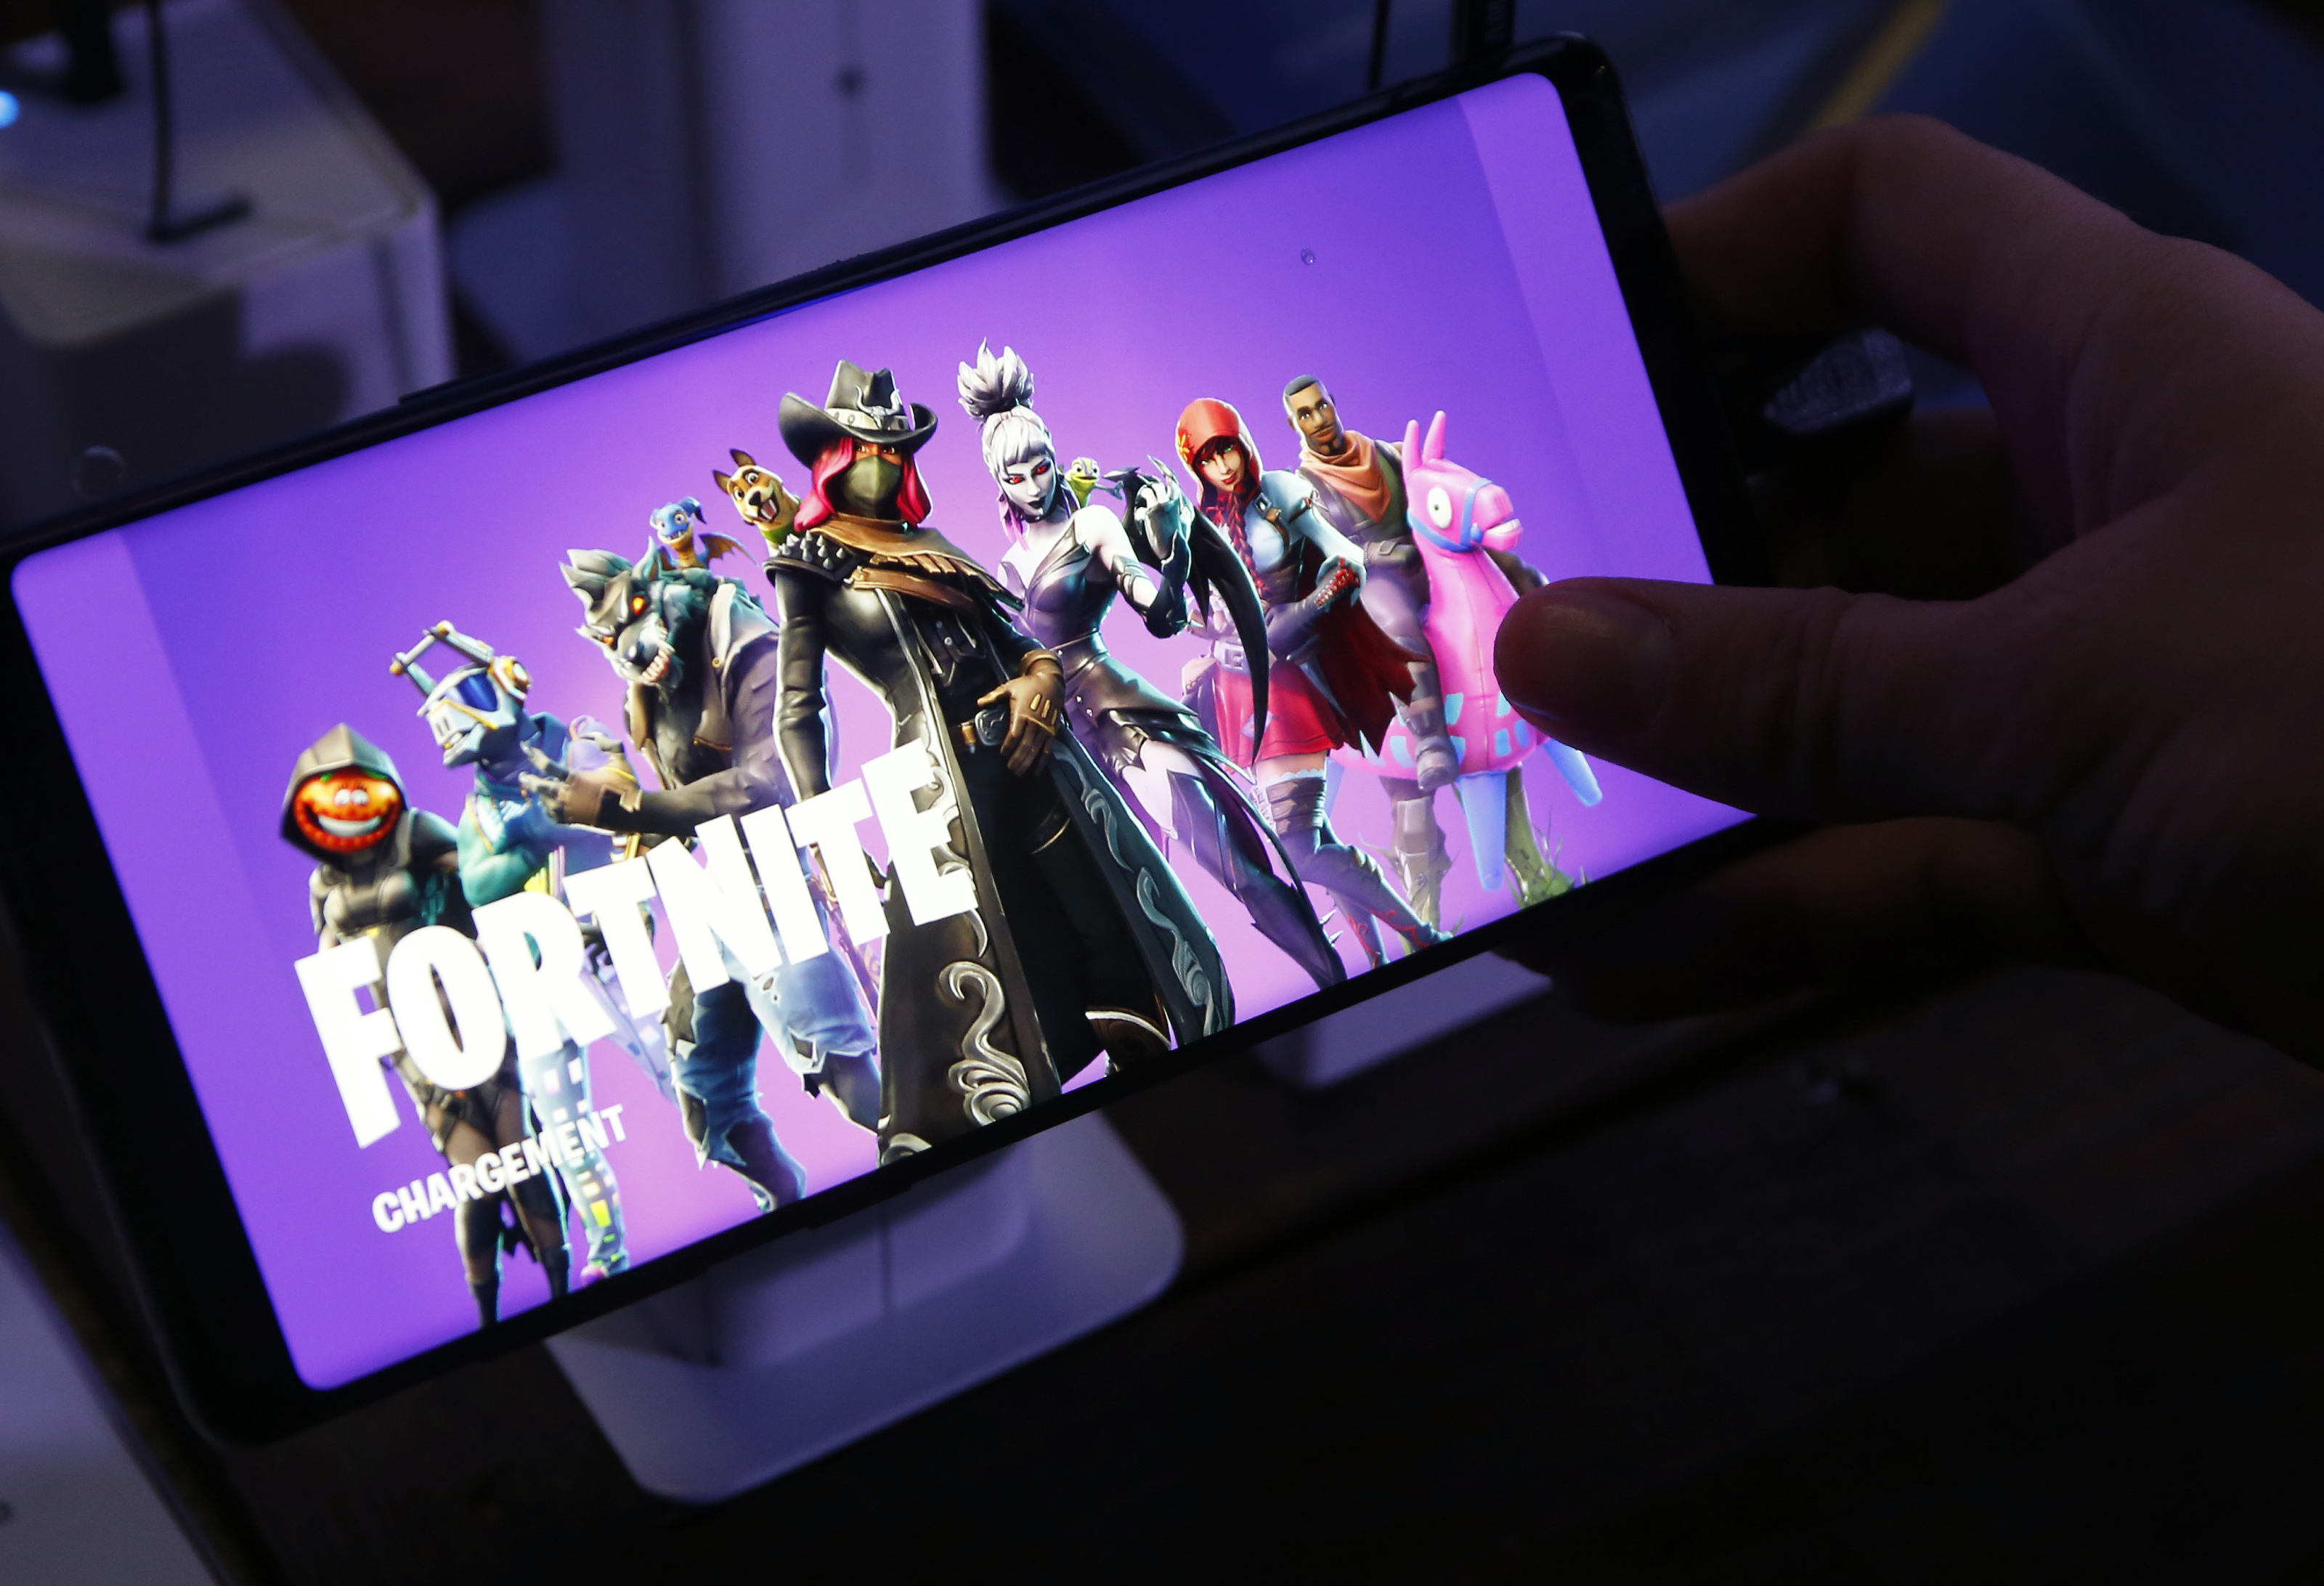 Fortnite Chapter 2: How to download and install it on Android